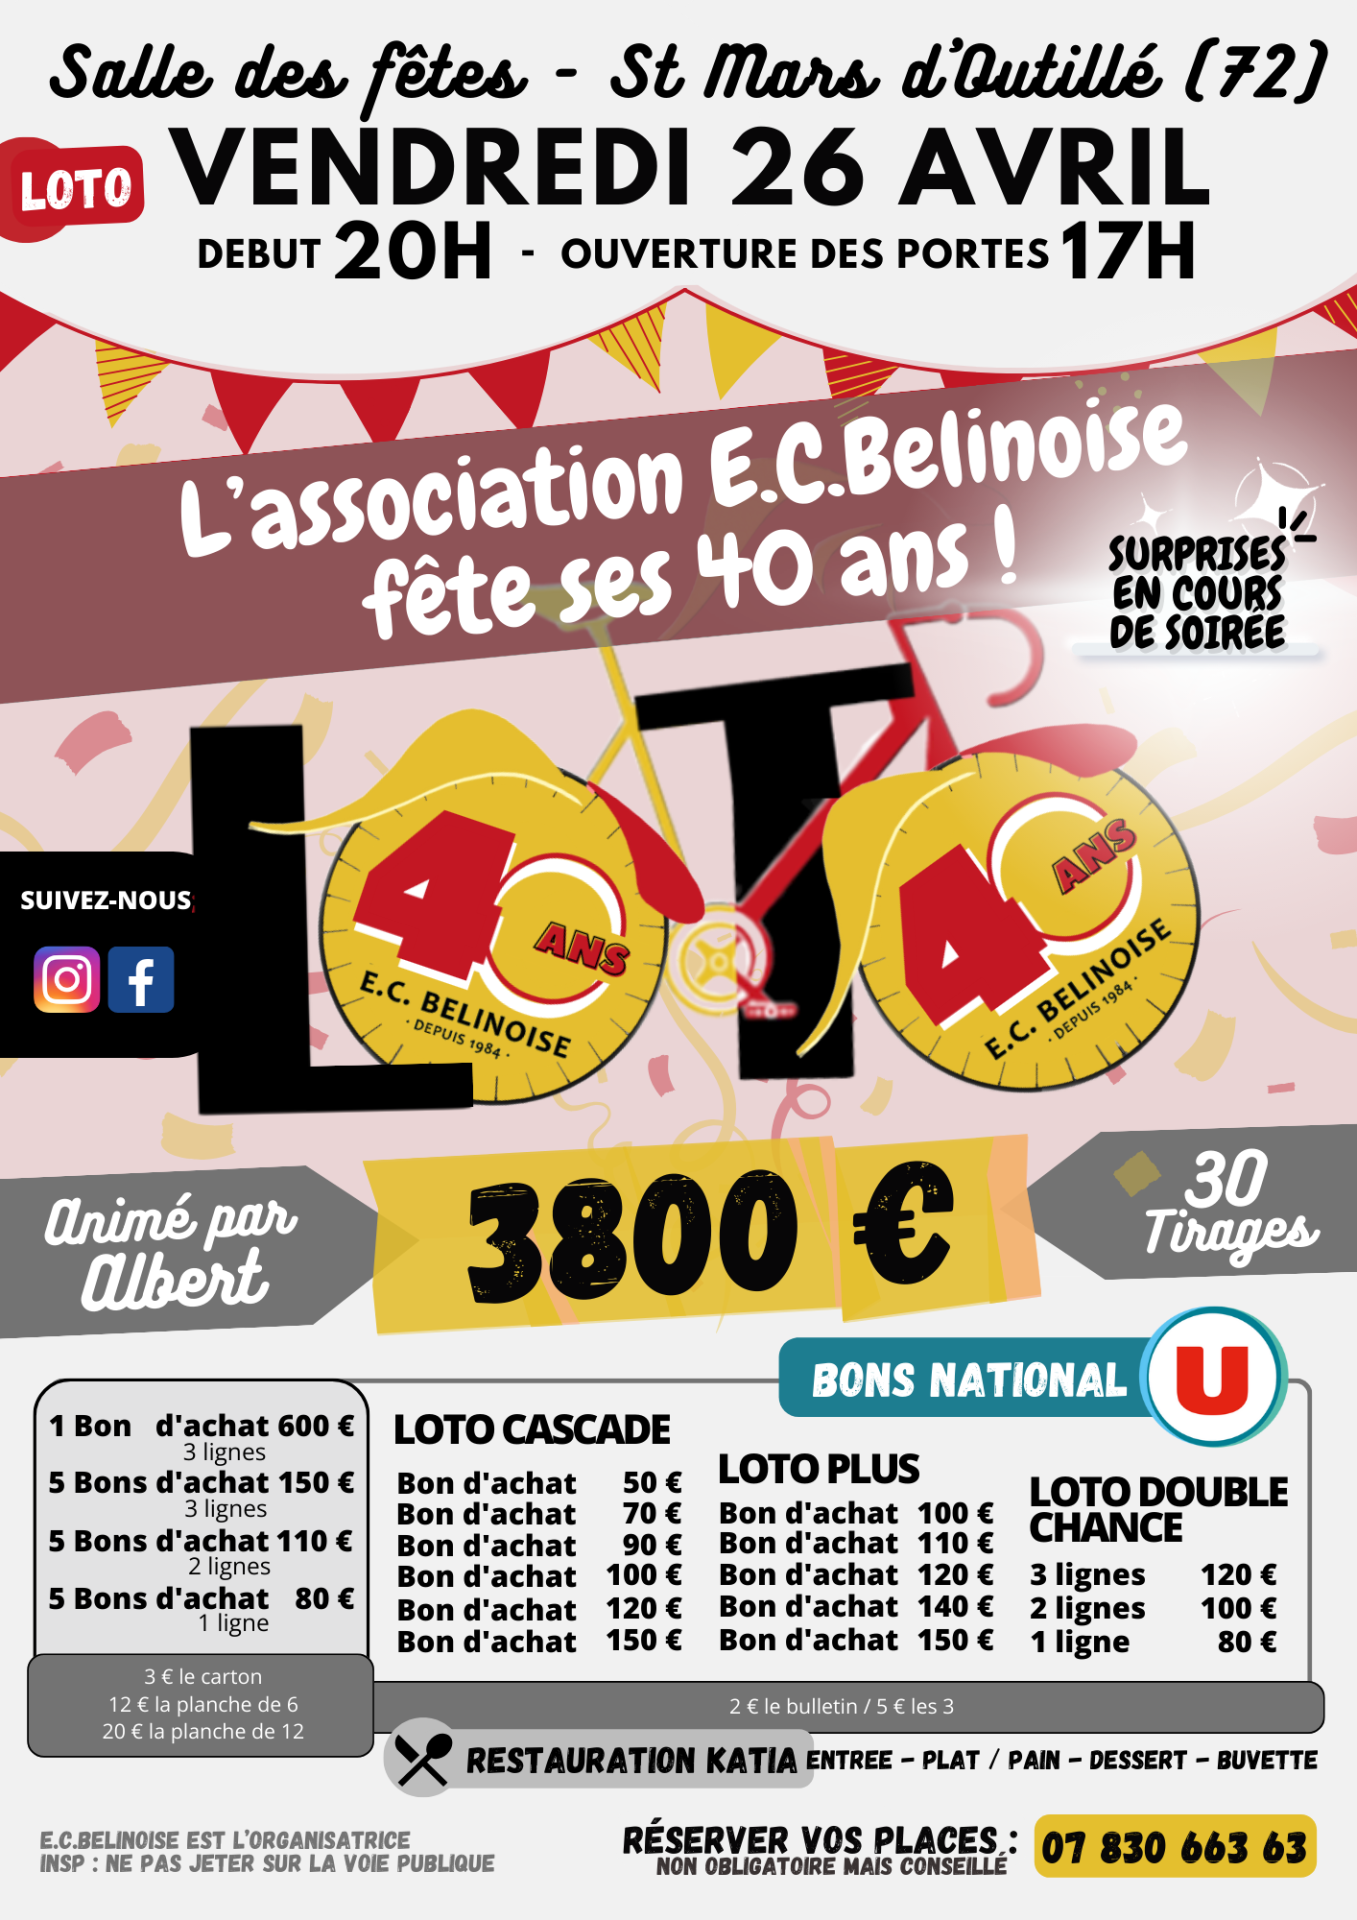 A4 loto 26 avril png